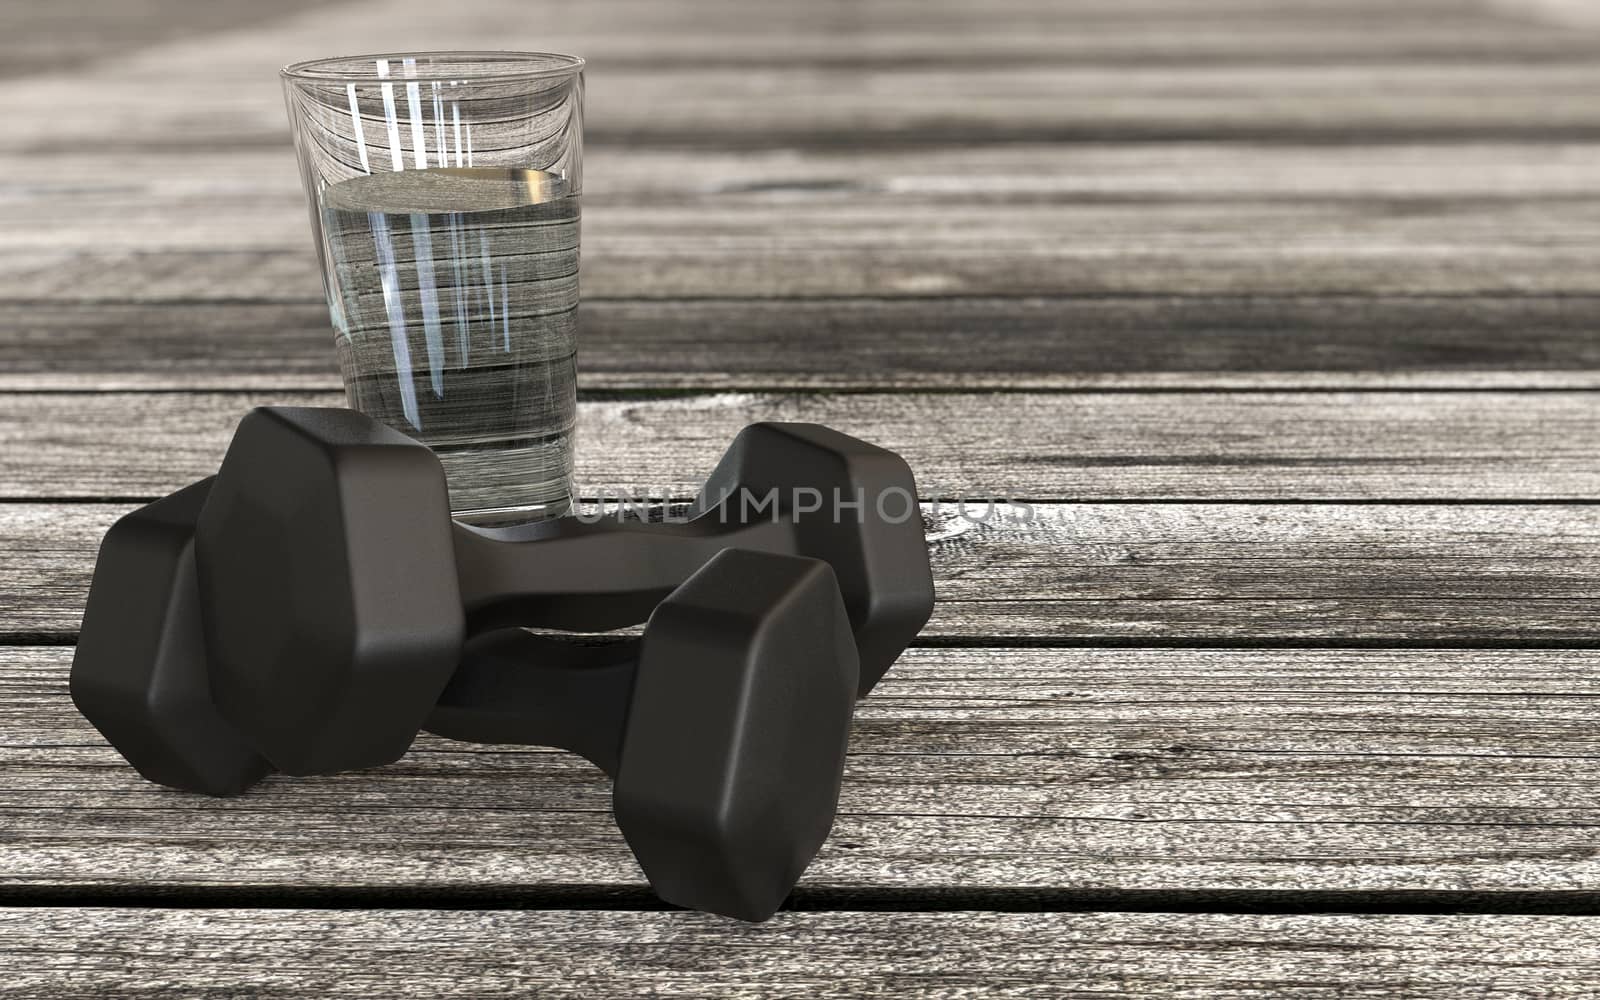 dumpbel on a wooden floor 3d rendered by F1b0nacci